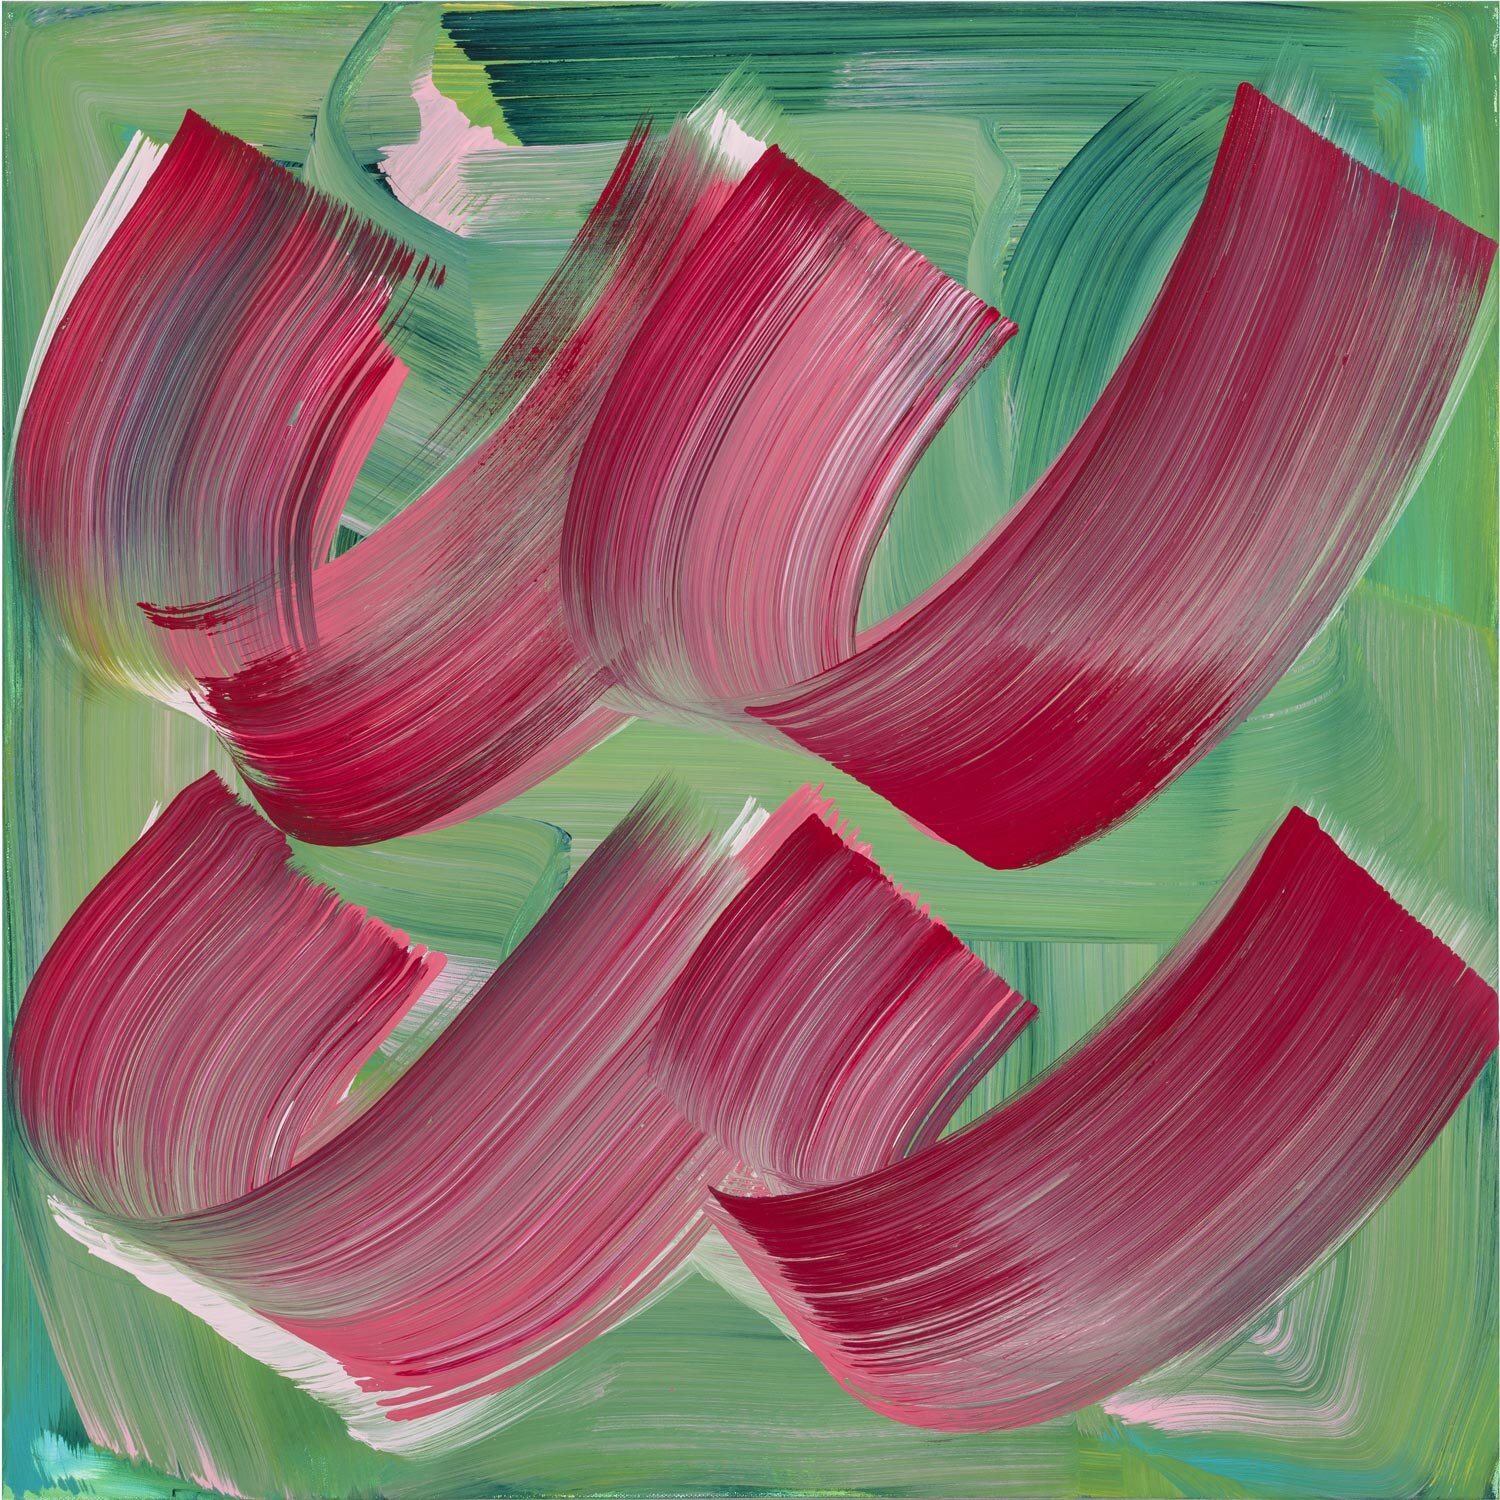  Notation, 2021 oil on canvas 30 x 30 in. 